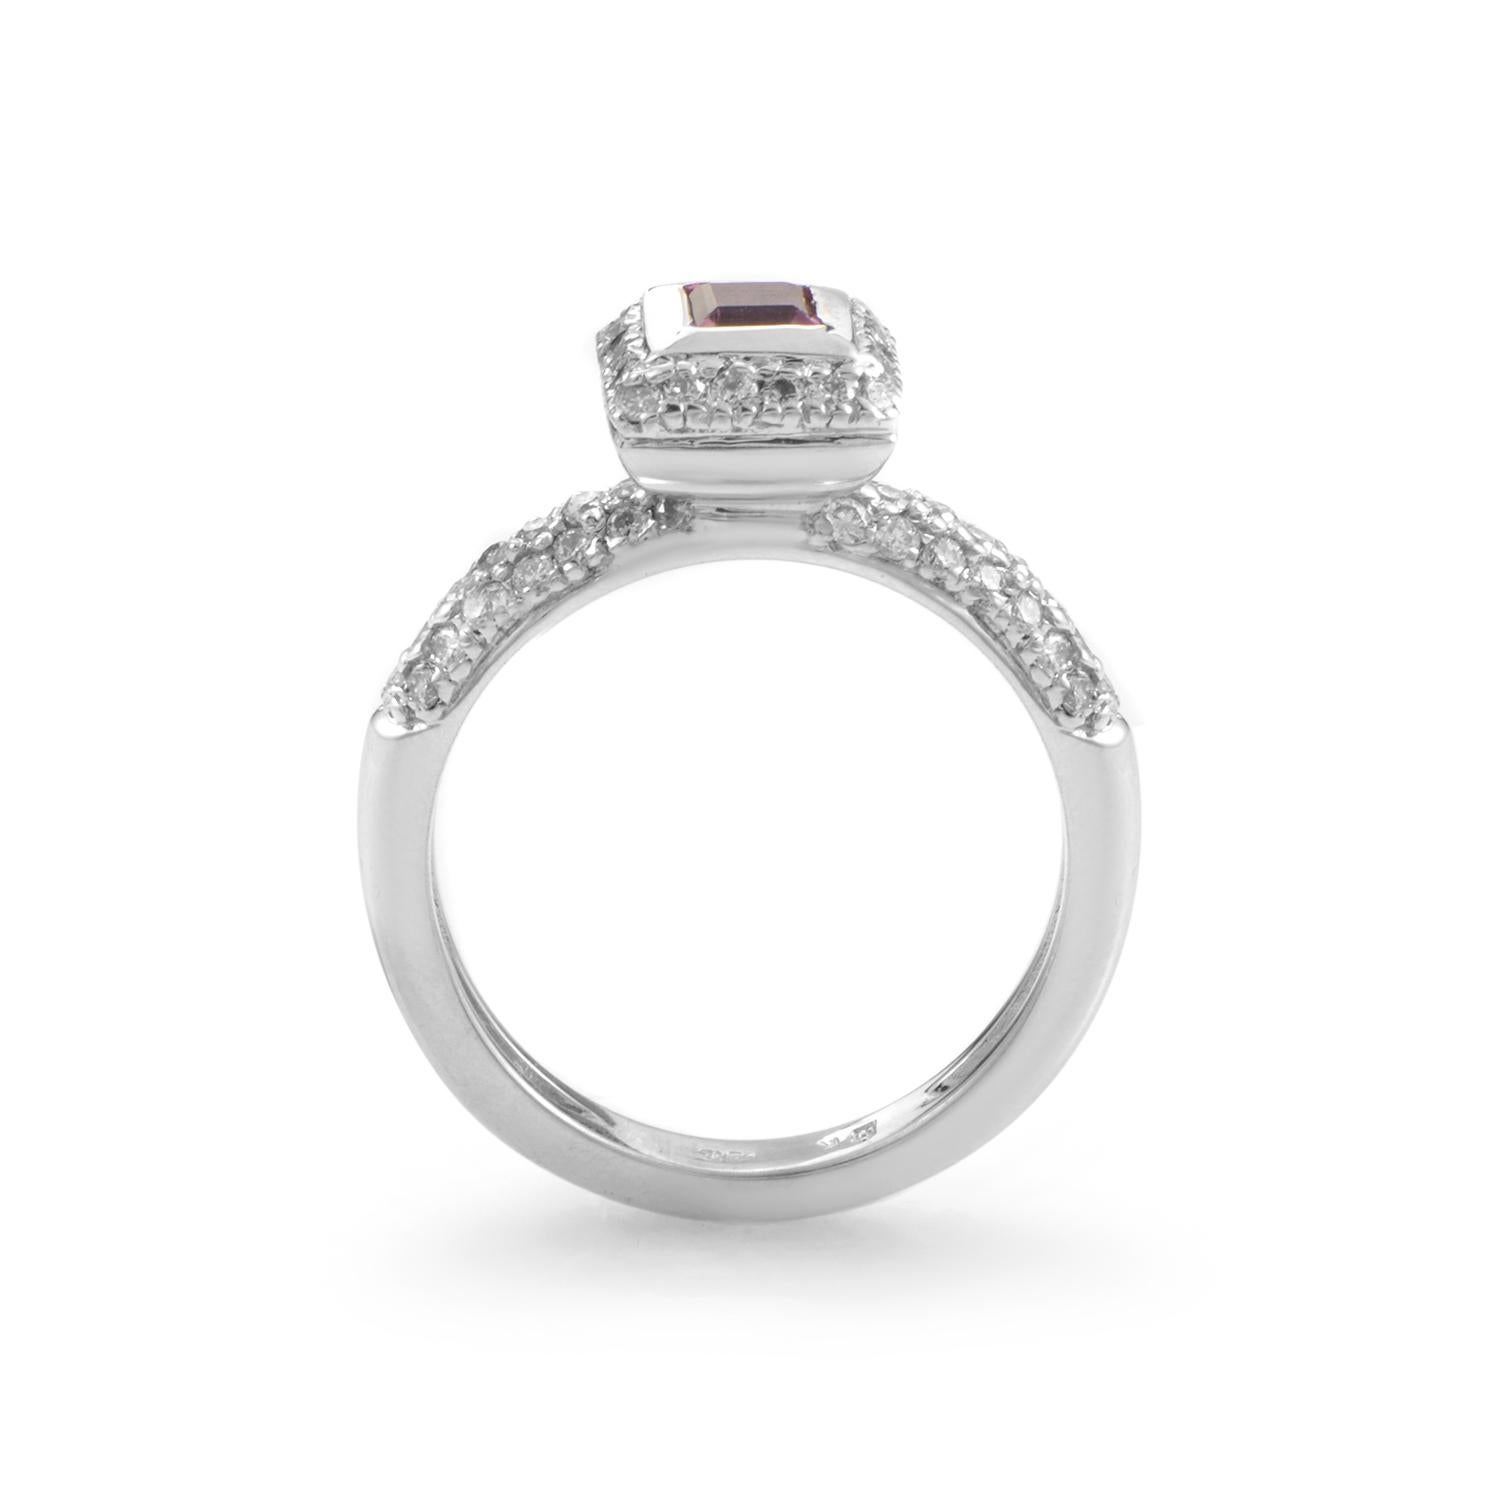 This luxurious Barry Kronen ring possesses stylish glamorous appeal that is both fashionable and extravagant; the ring is made of finest 18K white gold lavishly set with 0.65ct of splendid diamonds, while the center-spot is reserved for a majestic